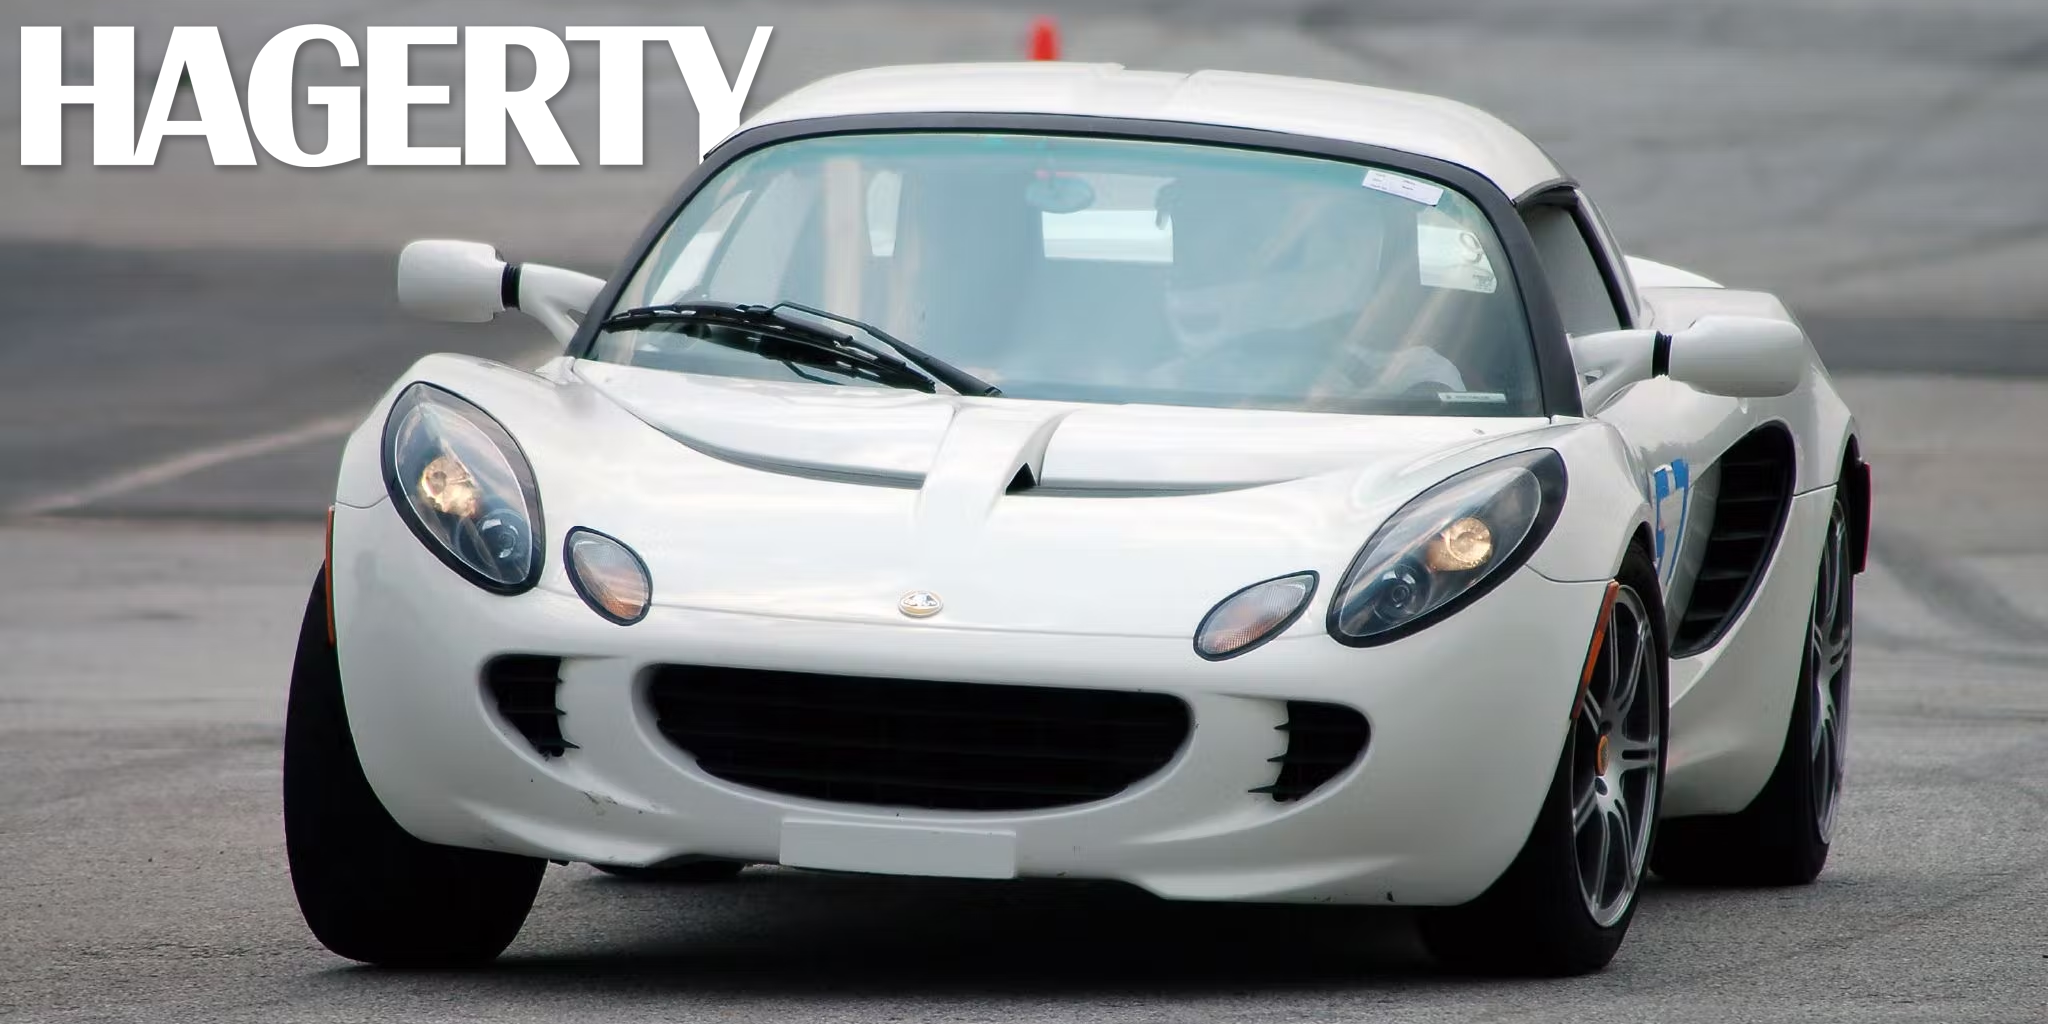 Hagerty Feature: Autocross, Gateway to Motorsports